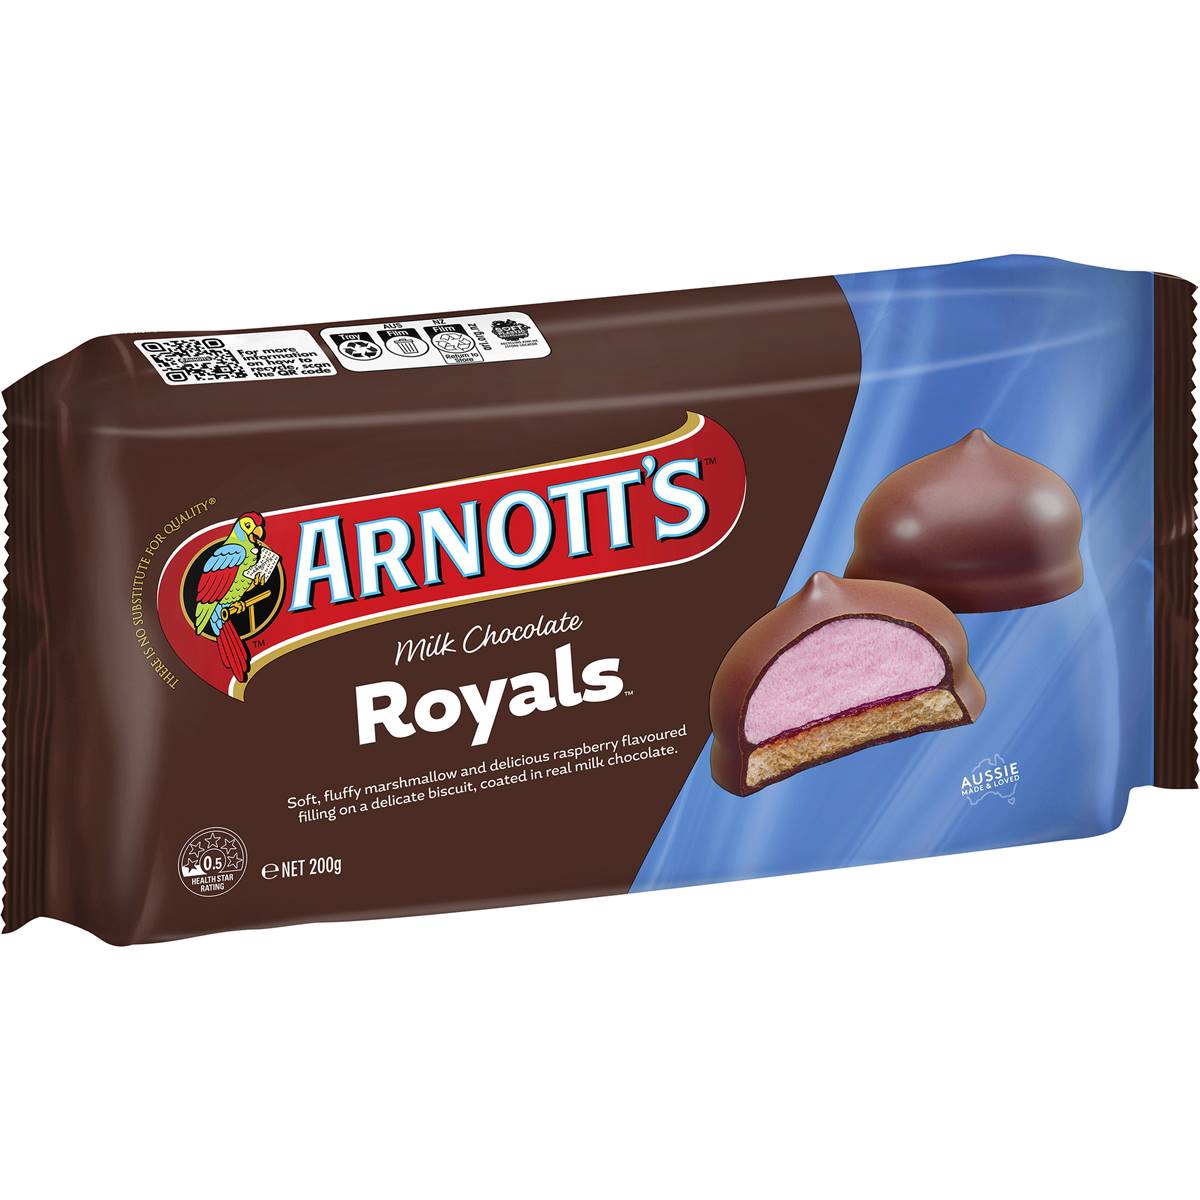 Calories In Arnotts Royals Chocolate Biscuits Calcount 6526